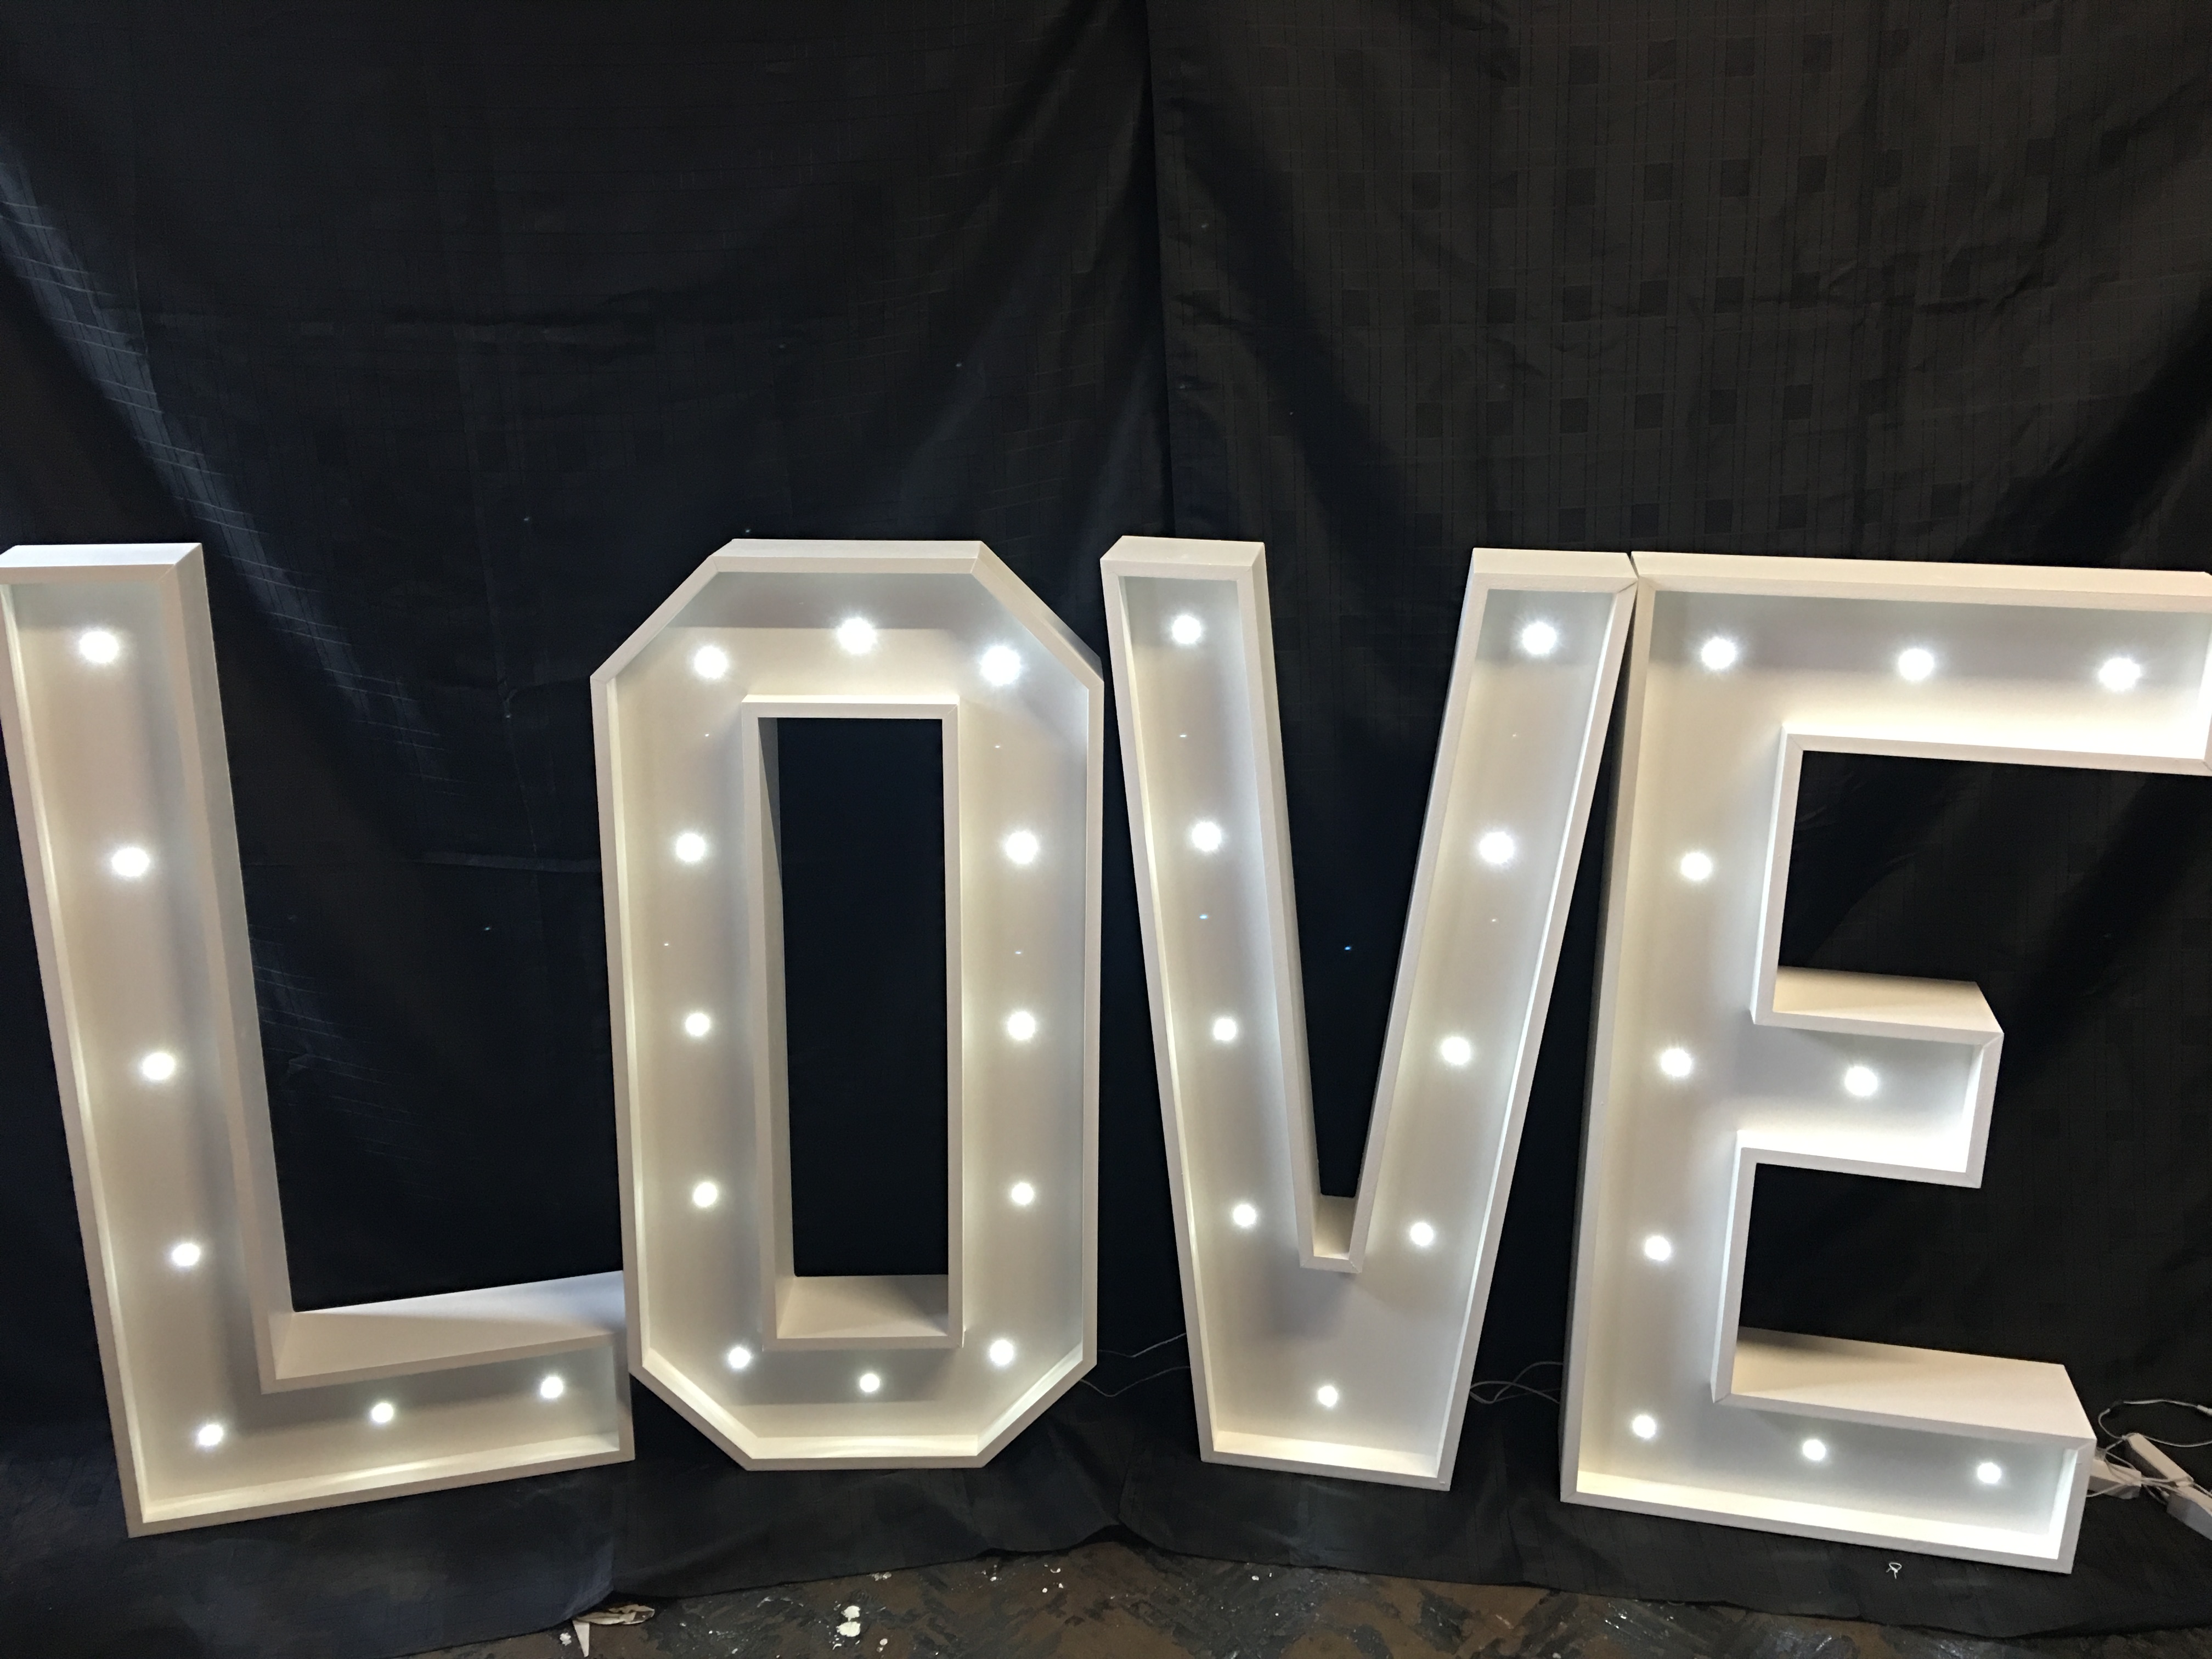 Ready for weddings......our new LOVE letters.